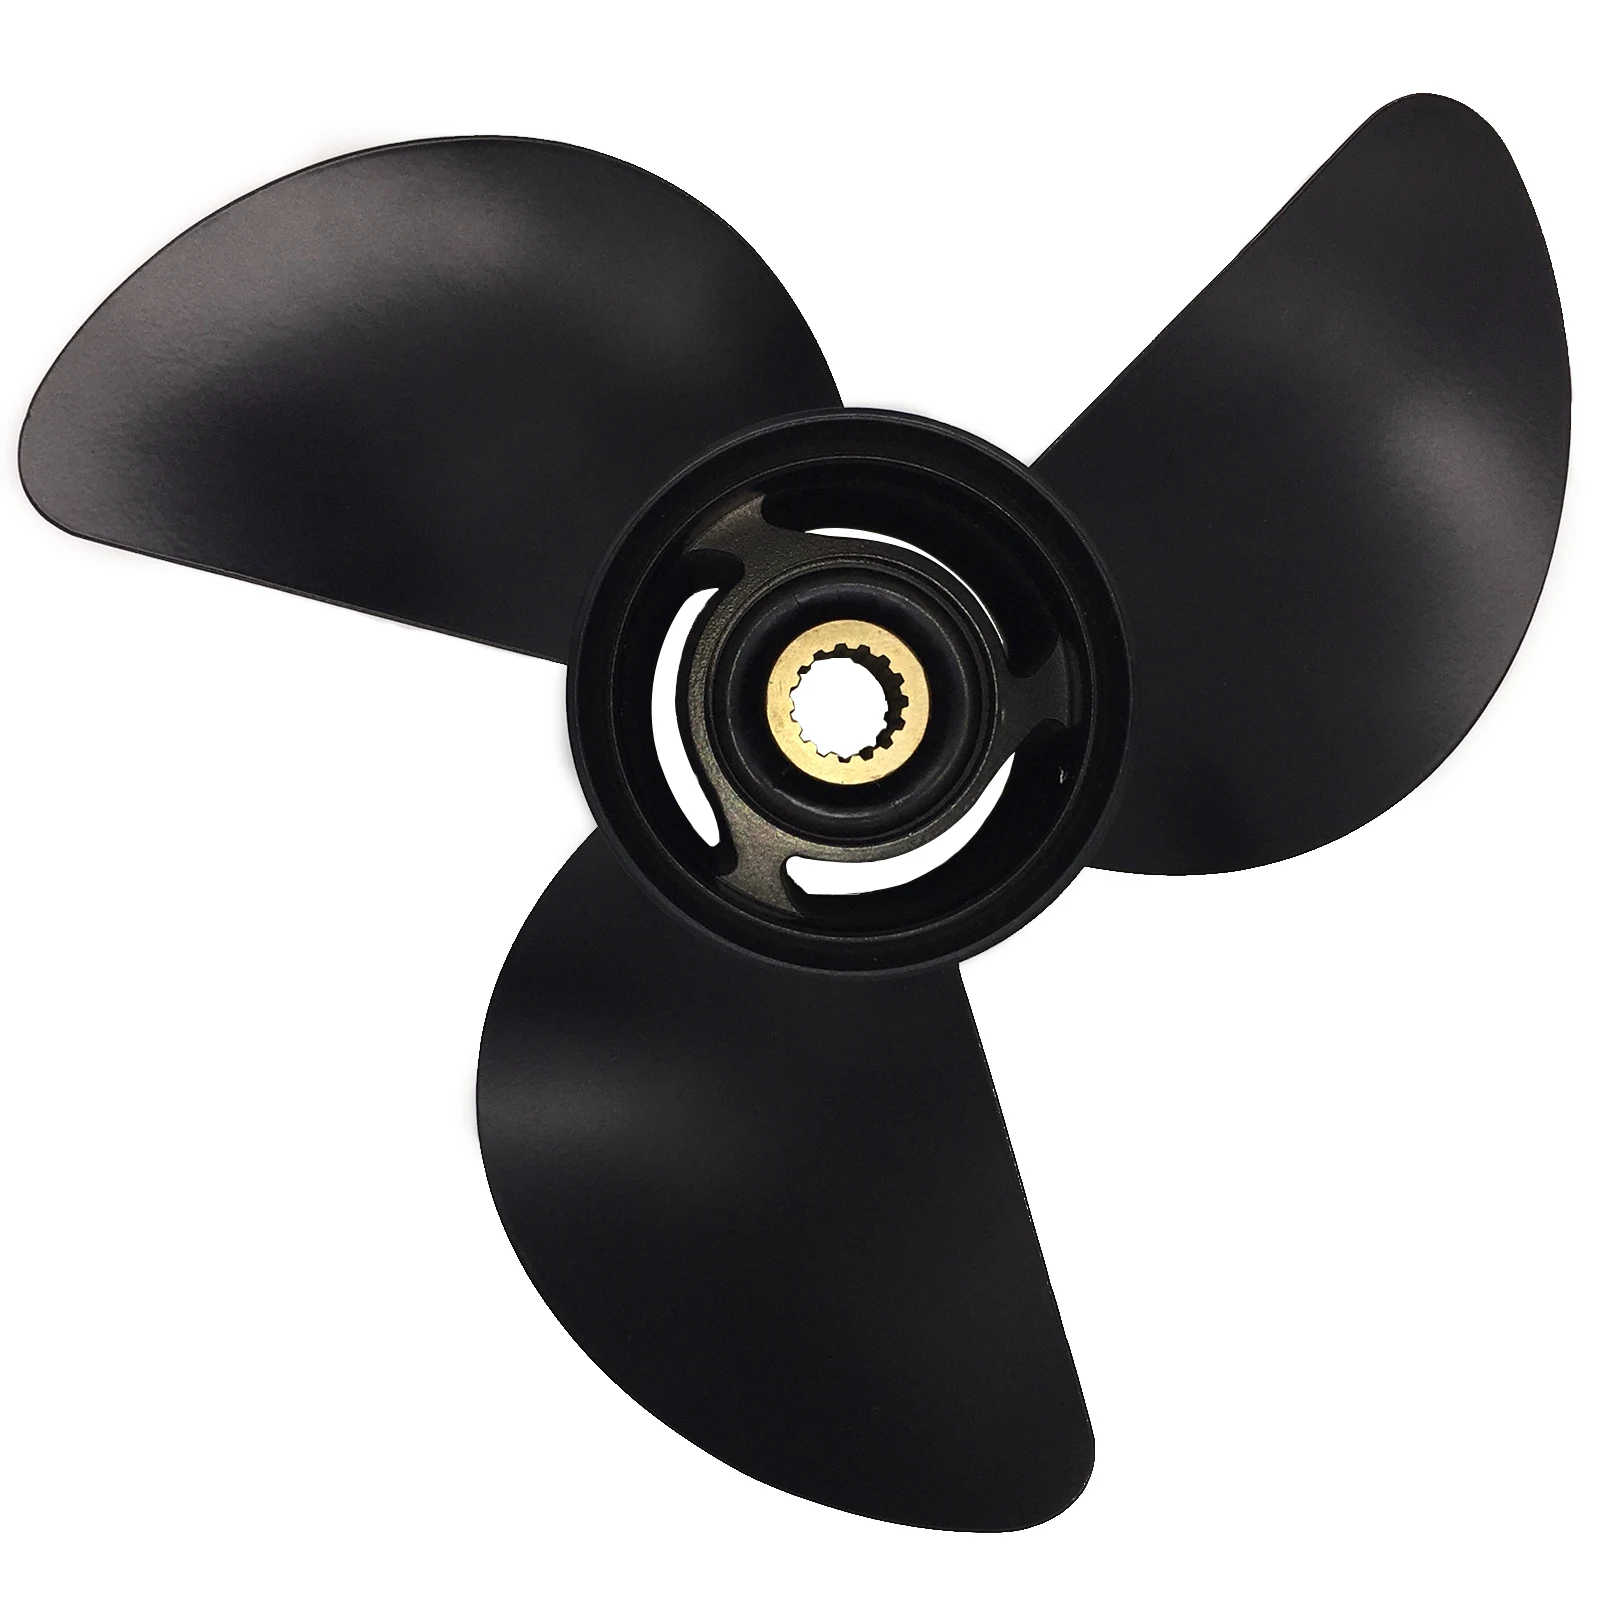 Boat Propeller 14x13 for Tohatsu 60HP-125HP 3 Blades Aluminum 15 Tooth RH OEM NO: 3HKB64525-0 14x13